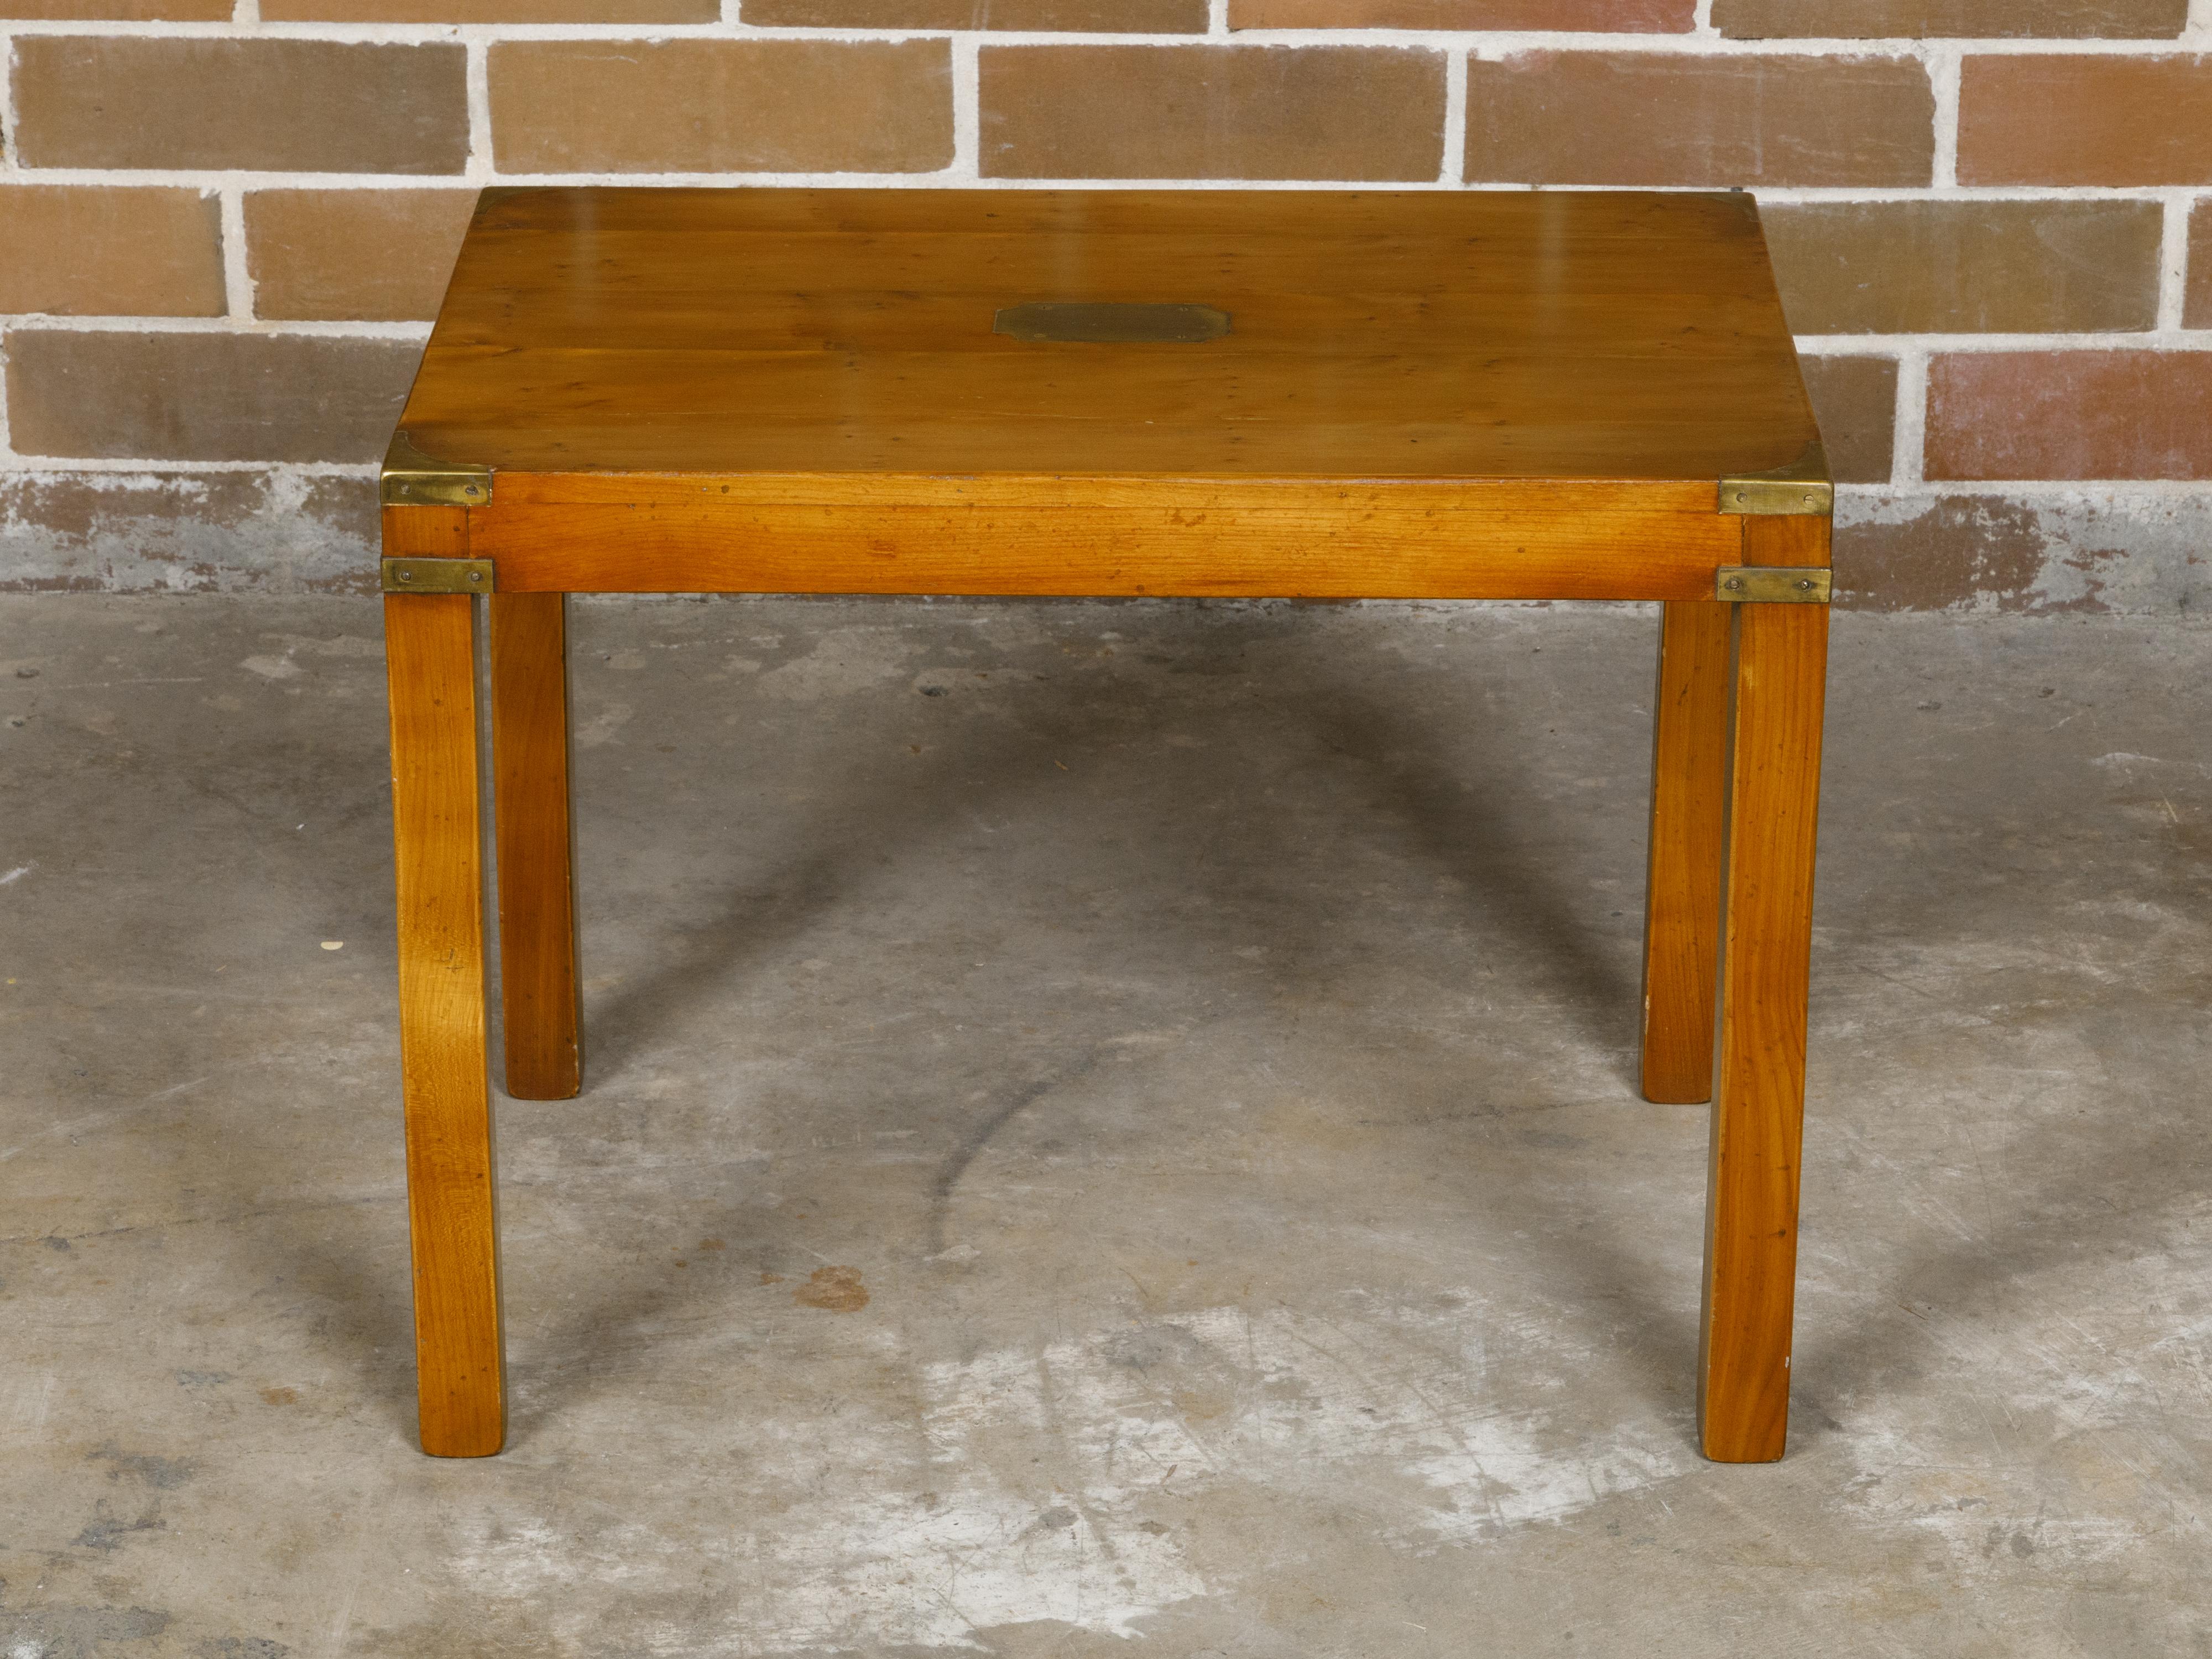 An English Campaign yew wood side table from circa 1920 with brass accents and straight legs. This English Campaign yew wood side table, dating back to circa 1920, encapsulates the refined elegance and practical design characteristic of the period.